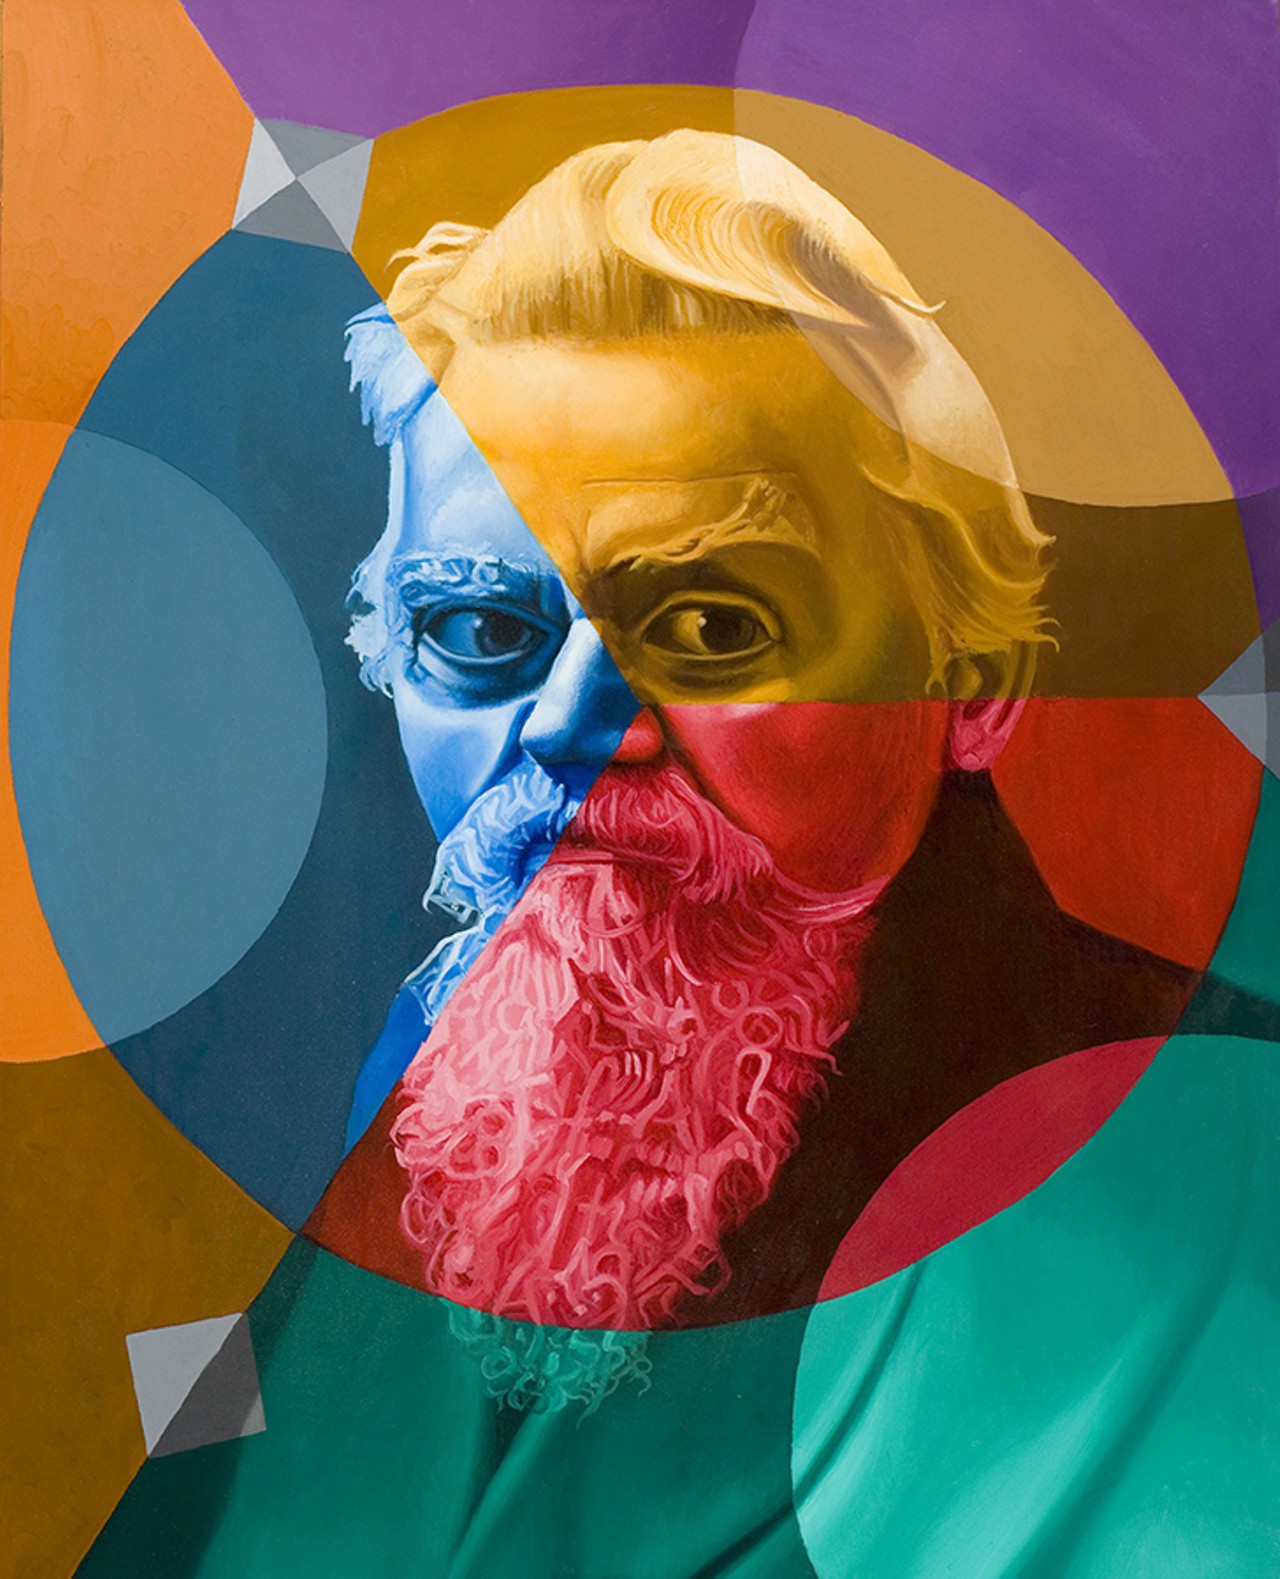 Friday, July 15Culture Pop!: Untold Stories at the Art & History Museums &#150; Maitland"Josef Henschen" by Trent Tomengo